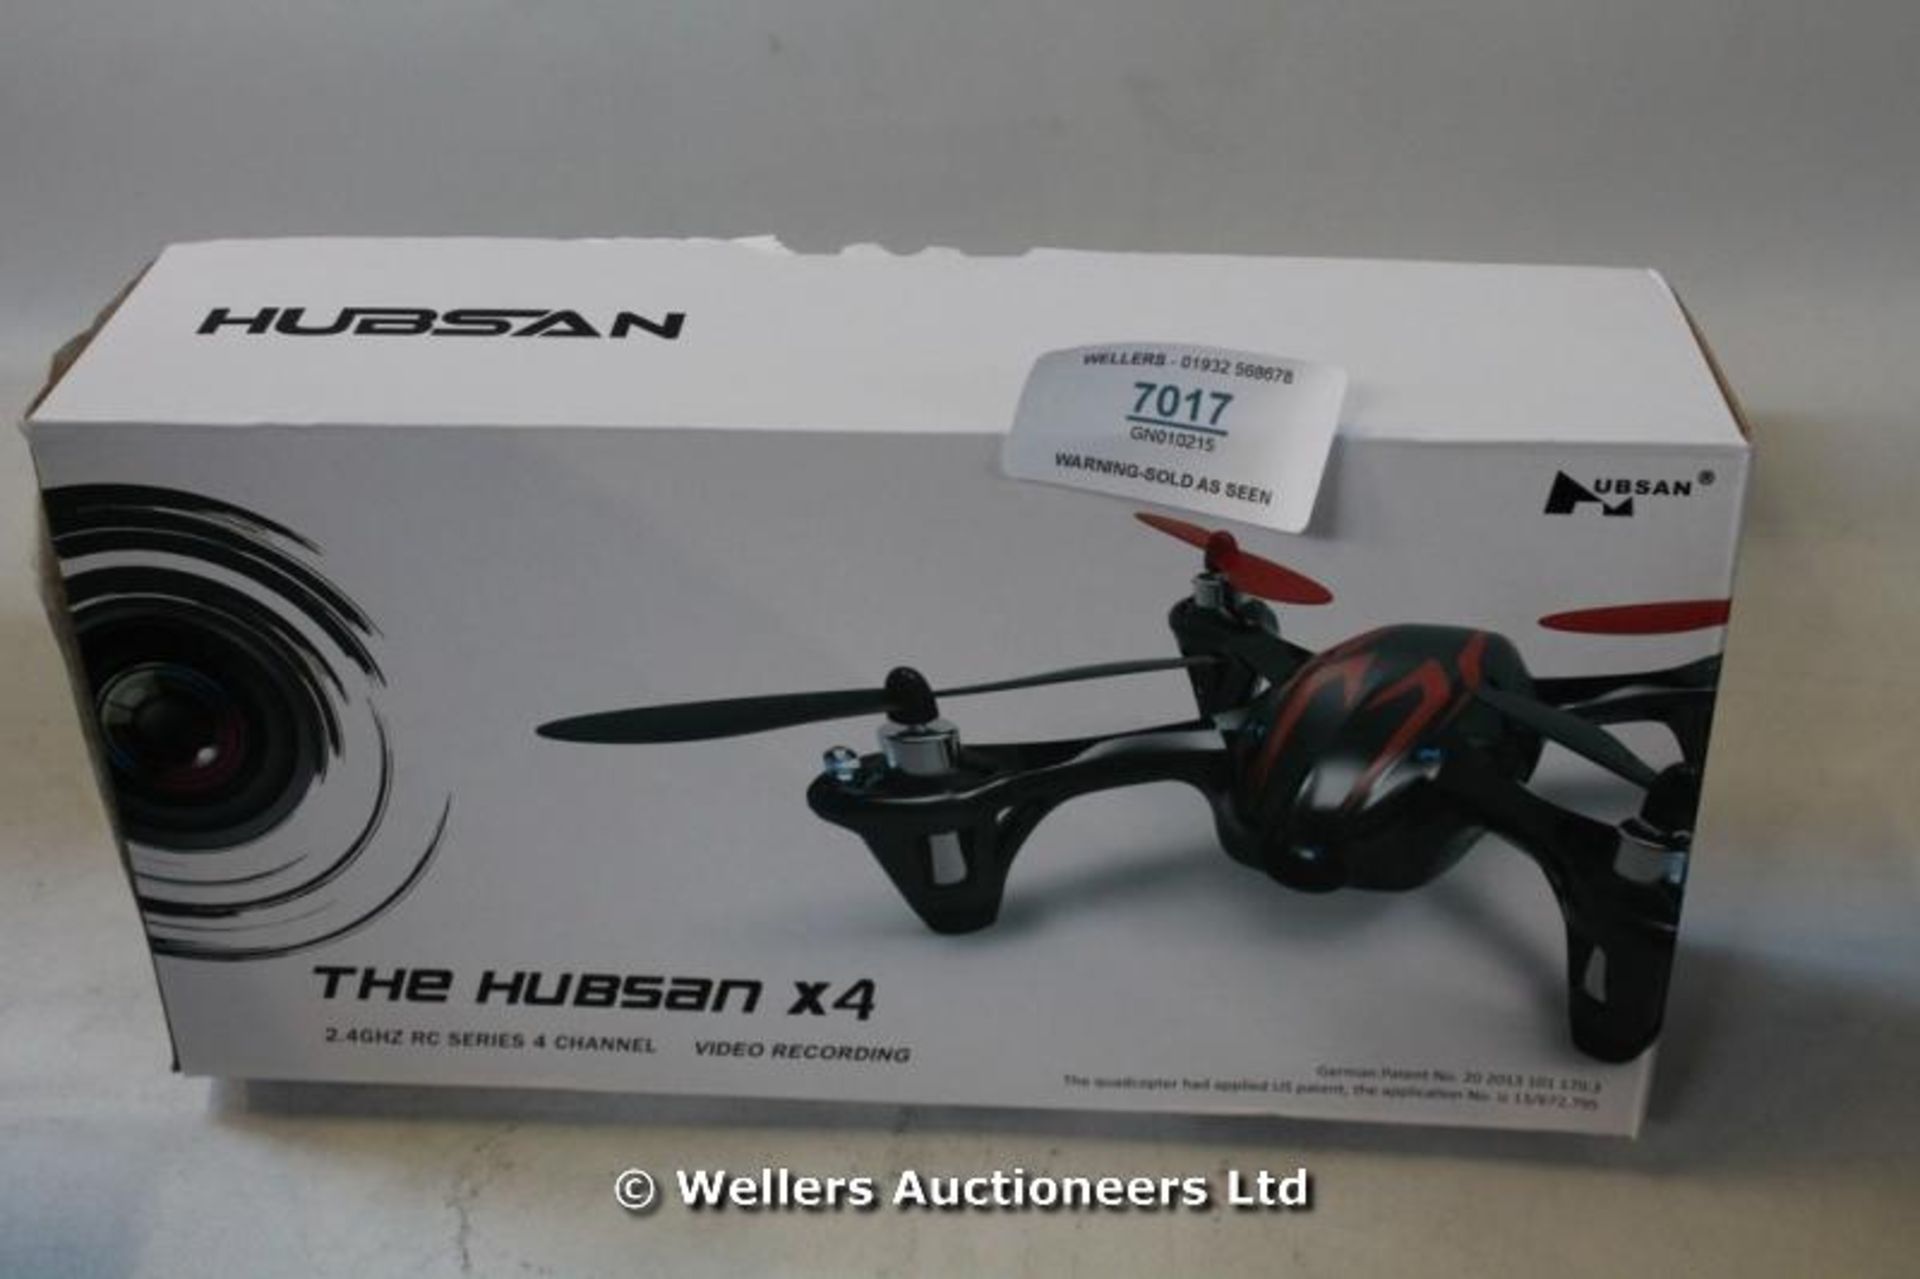 *THE HUBSAN X4 2.4GHZ RC SERIES 4 CHANEL VIDEO RECORDING / GRADE: UNCLAIMED PROPERTY / BOXED (